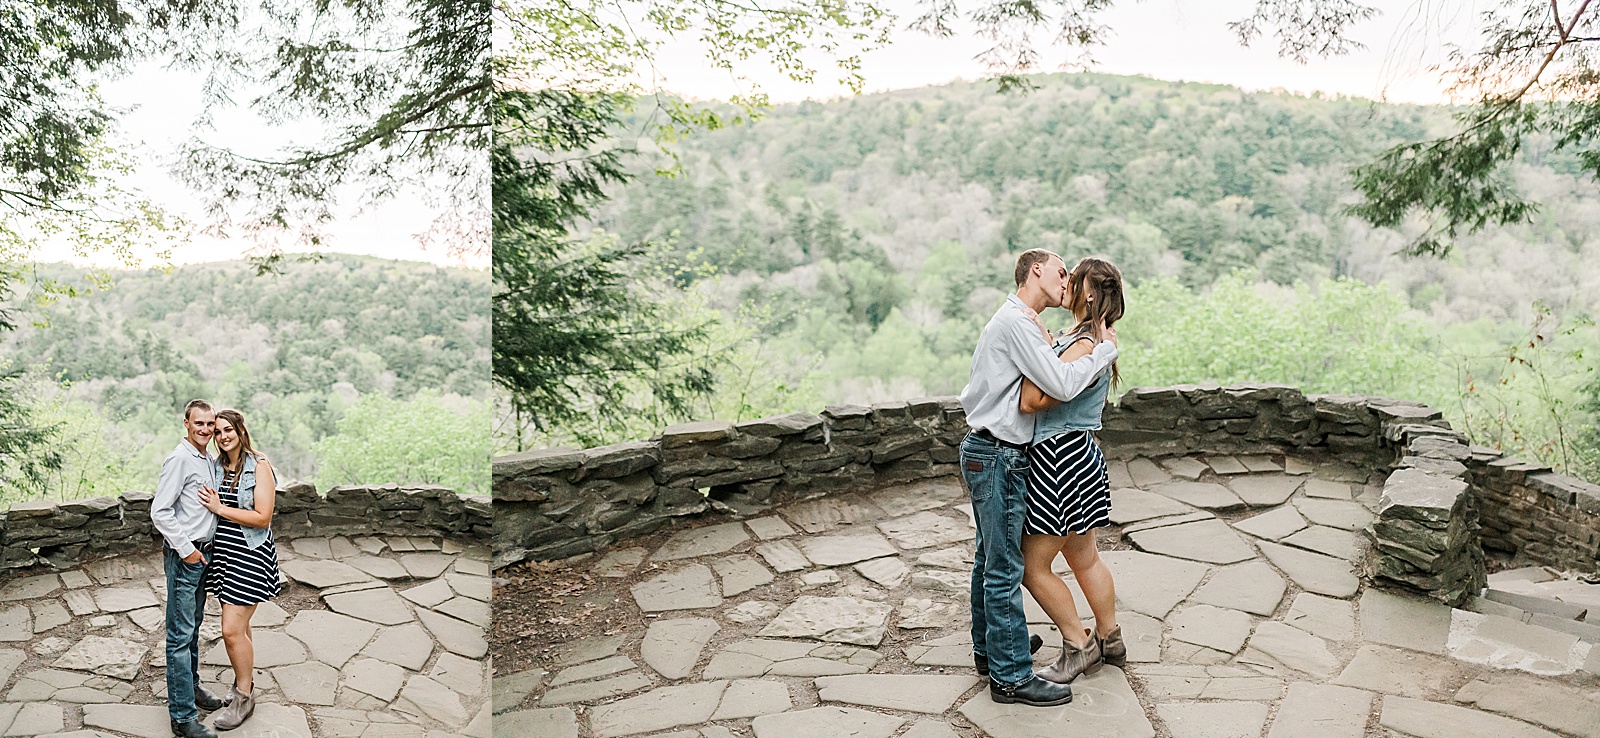 Mohican Southern Ohio Engagement Session-46.jpg